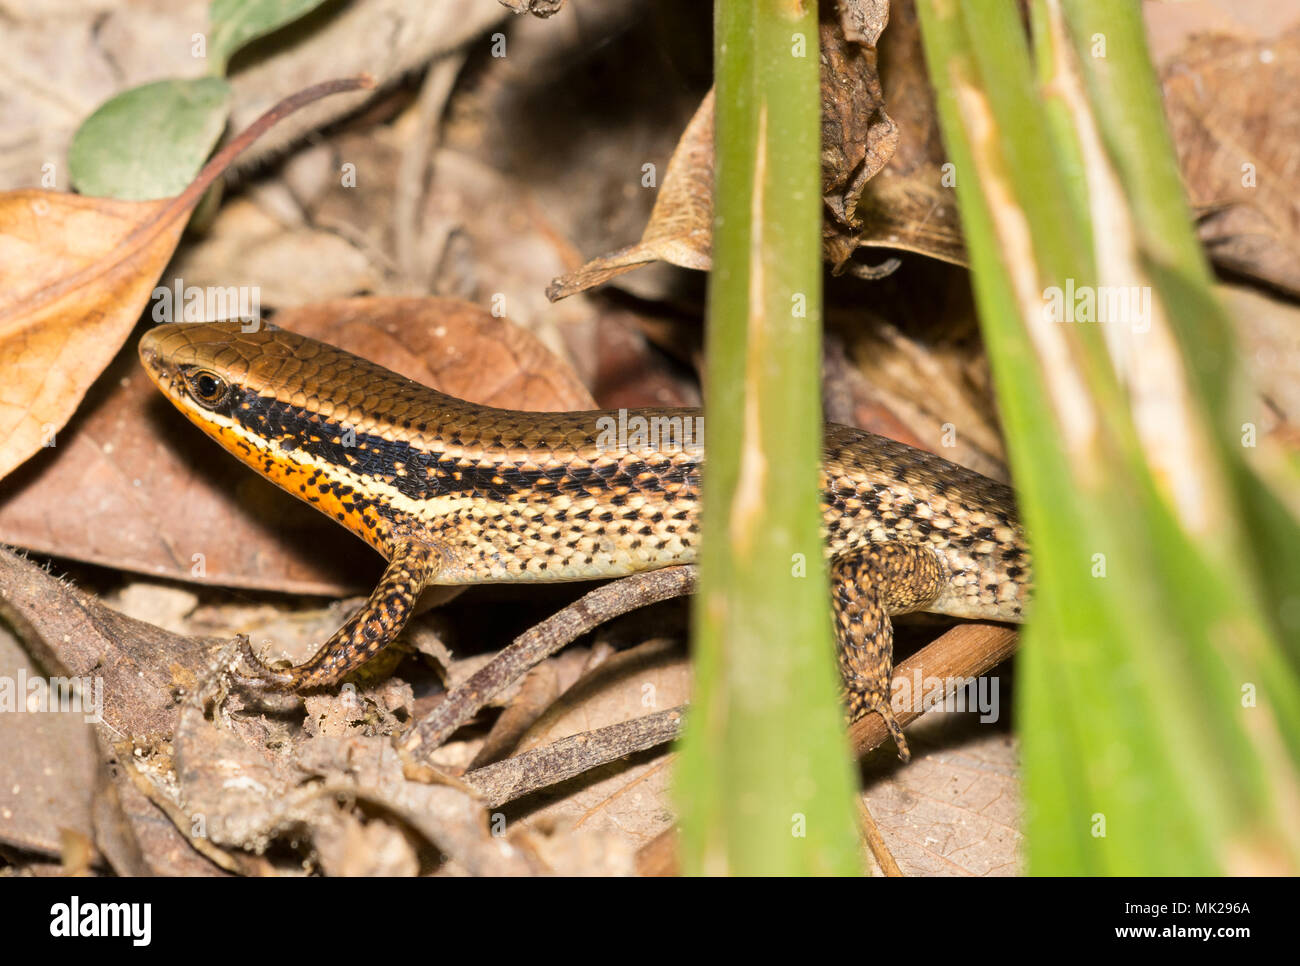 Forest Speckled Skink (Eutropis macularia) in the rainforest on the island of Phuket Thailand Stock Photo